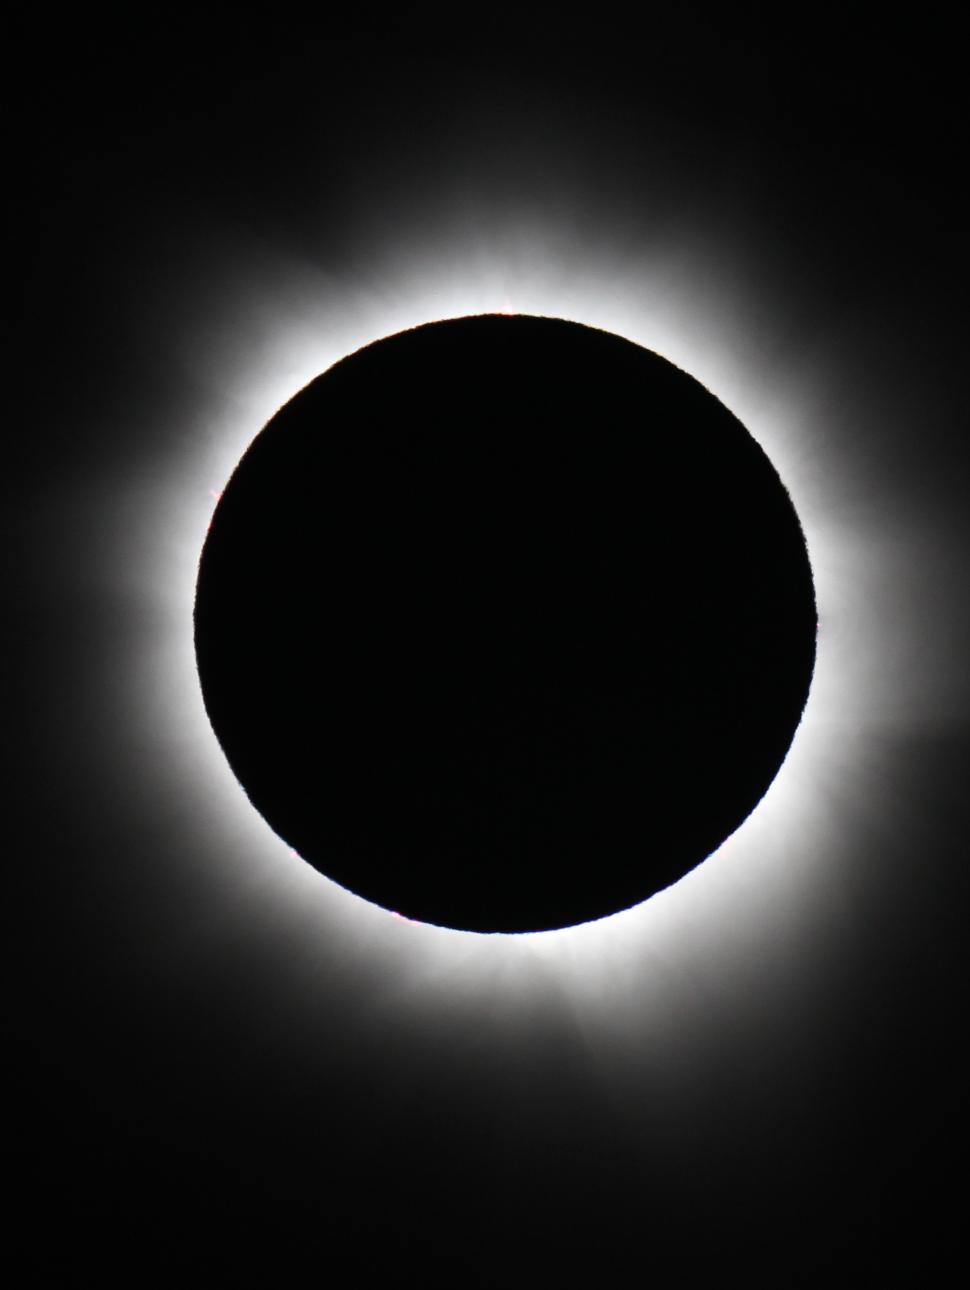 The eclipsed Sun surrounded by the corona during totality in 2012. 